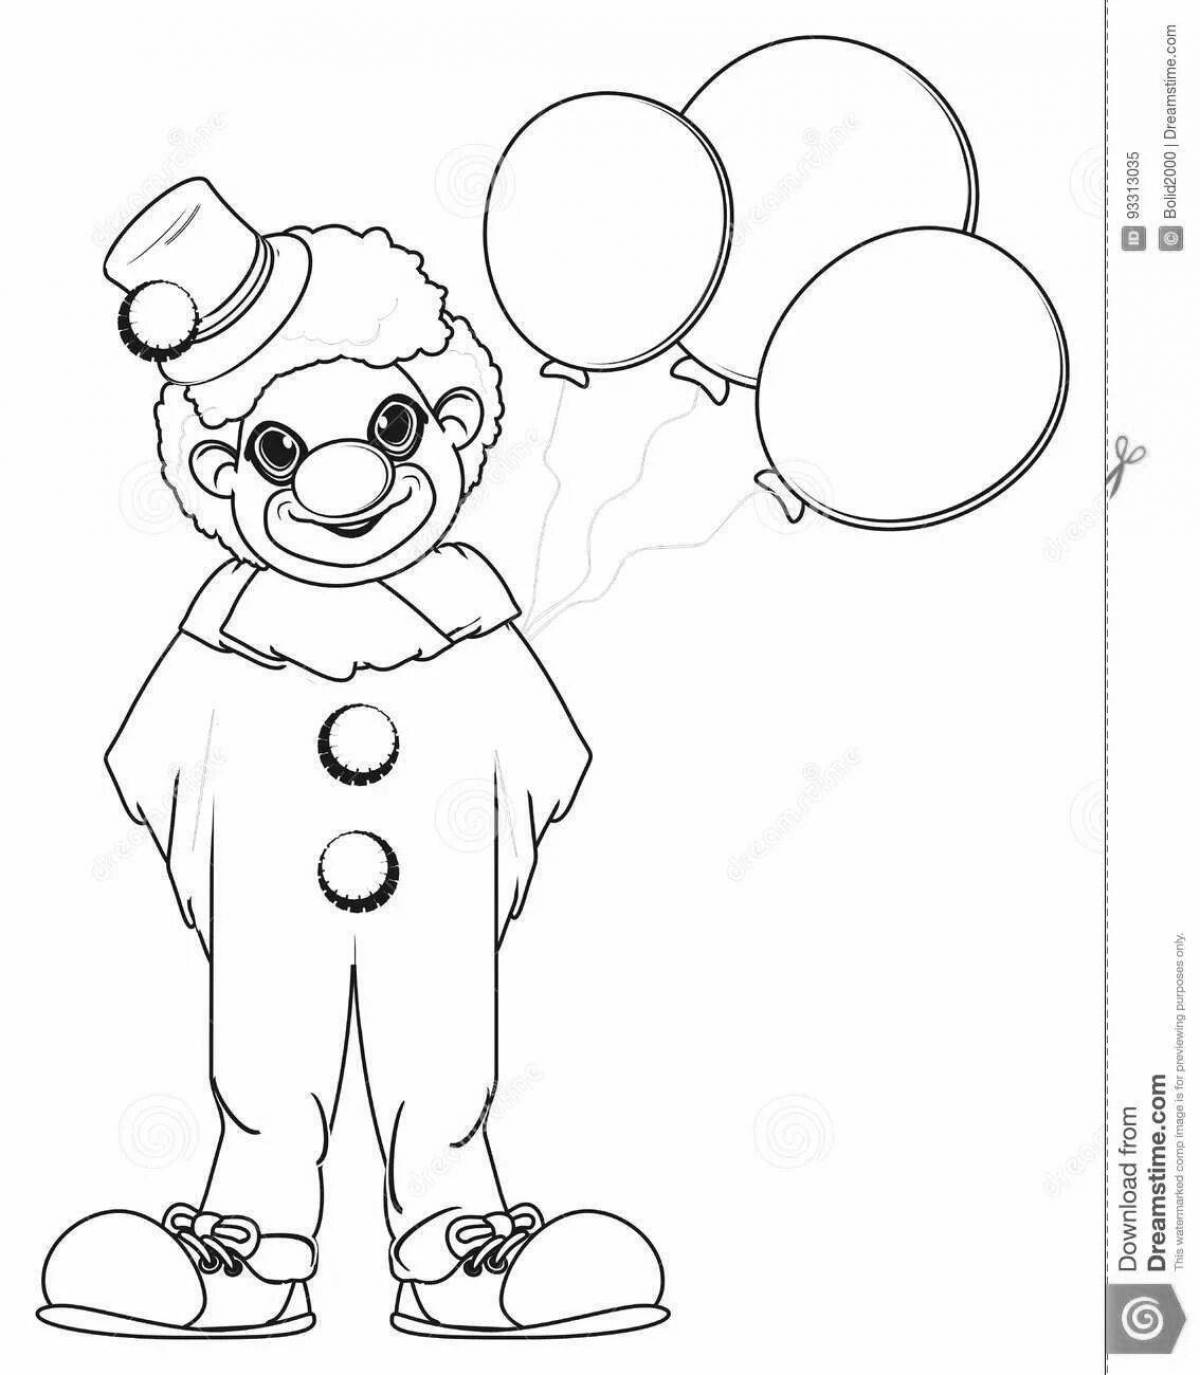 An excited clown with balloons